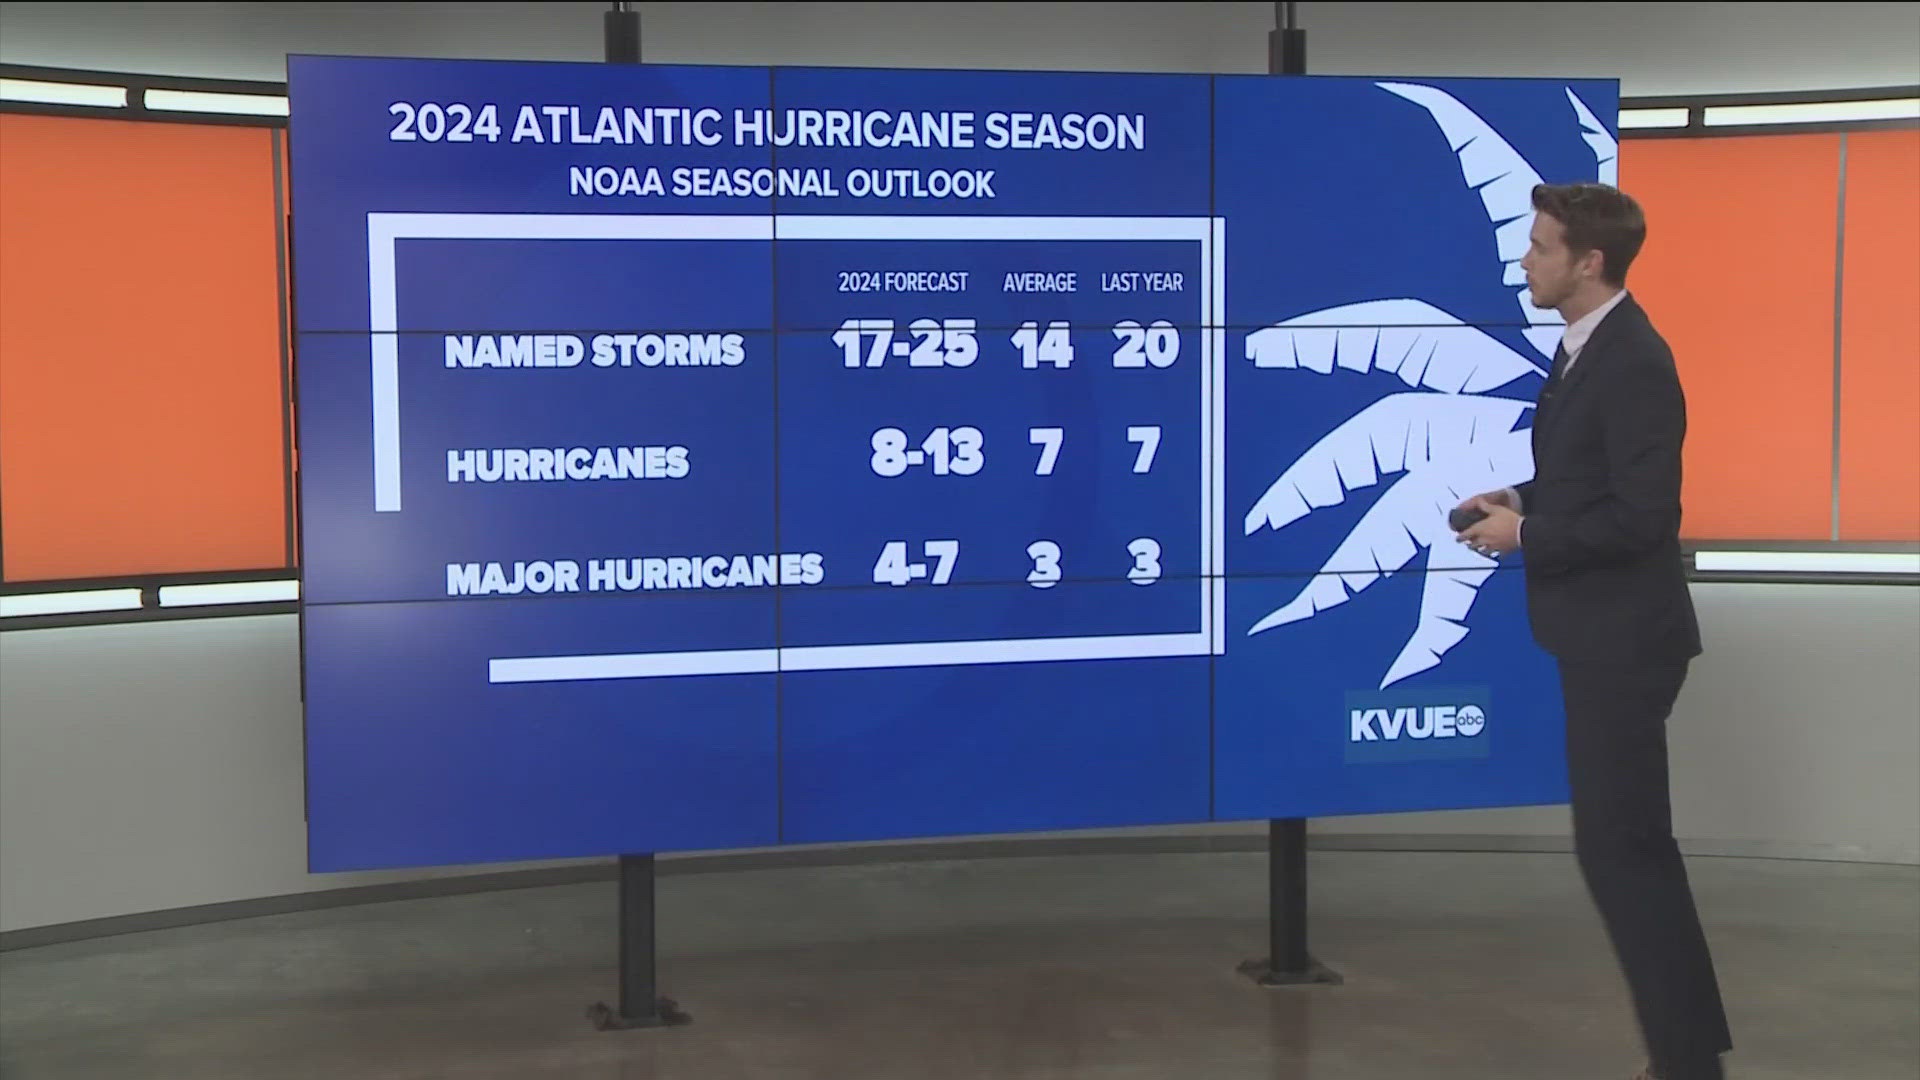 NOAA released its 2024 Atlantic hurricane outlook on May 23. KVUE Meteorologist Shane Hinton breaks down what is expected to be an extraordinary tropical season.